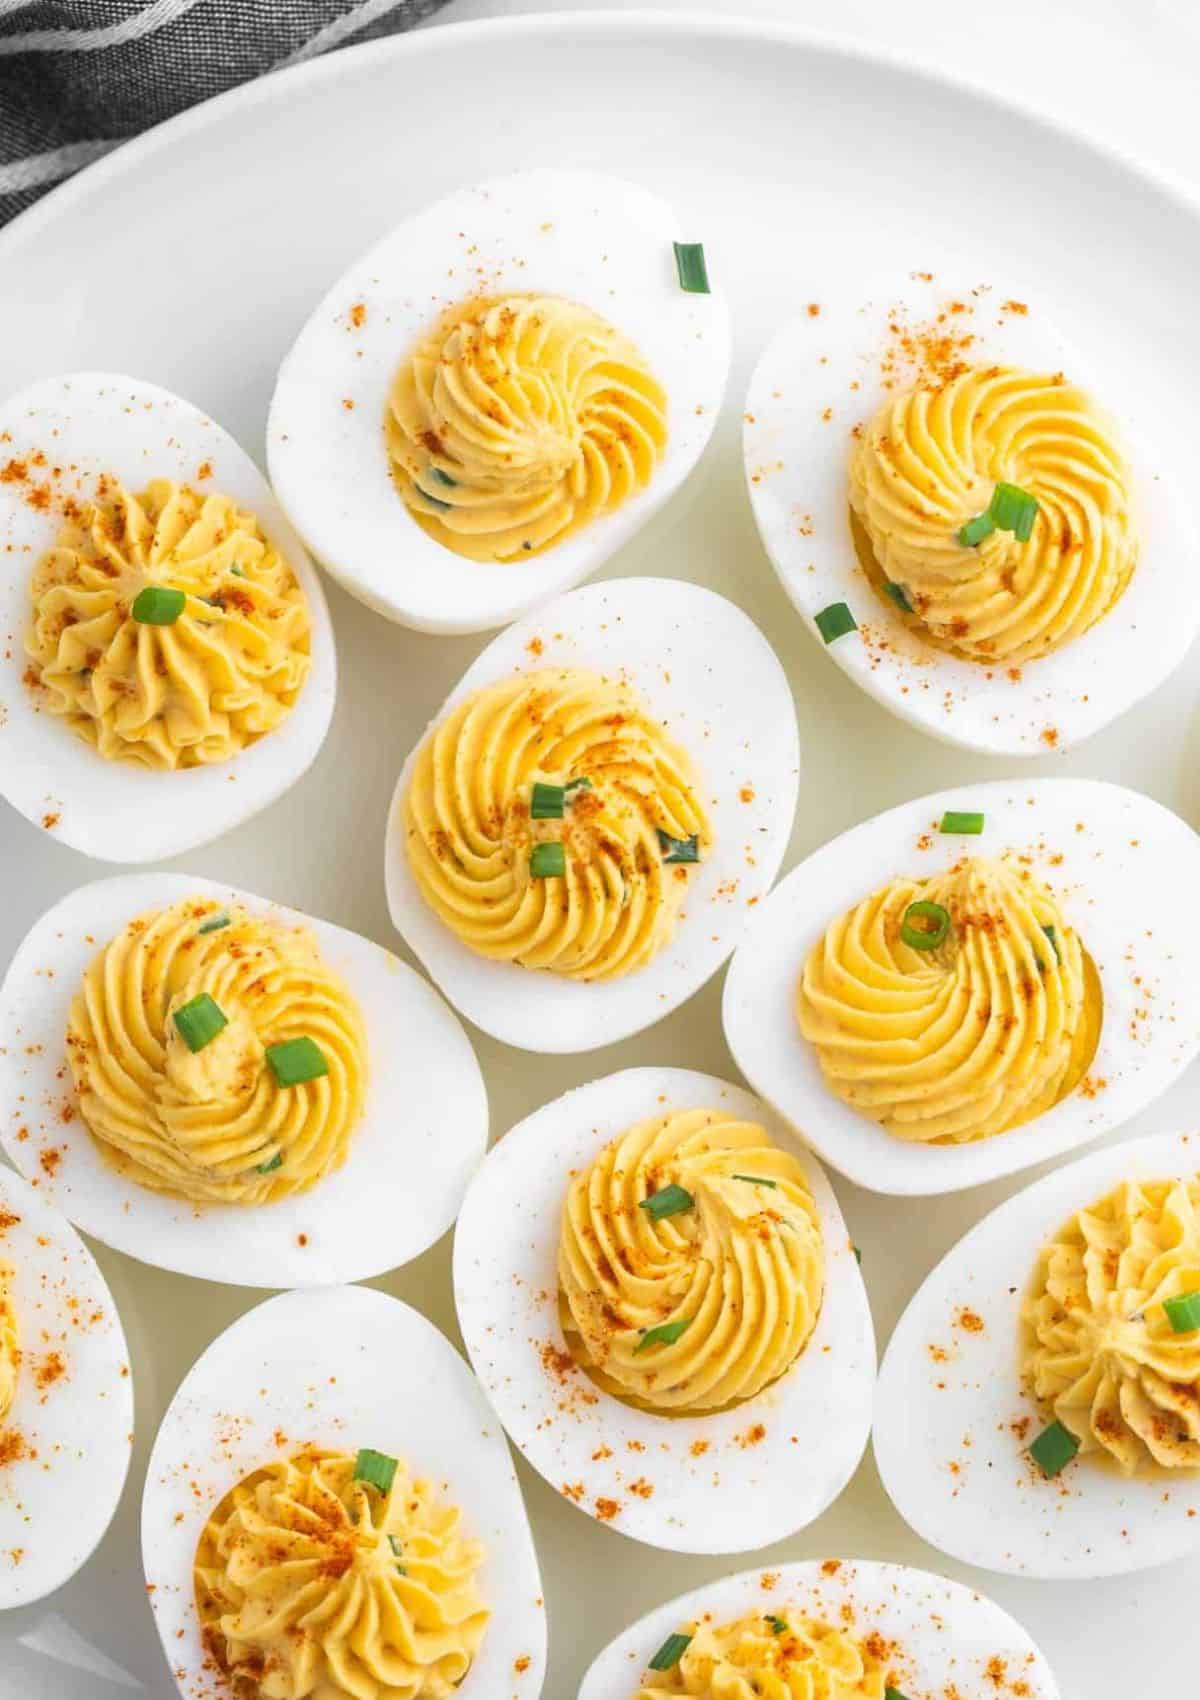 Sliced open boiled eggs with yellow egg yolk mixture inside eggs with paprika on top.